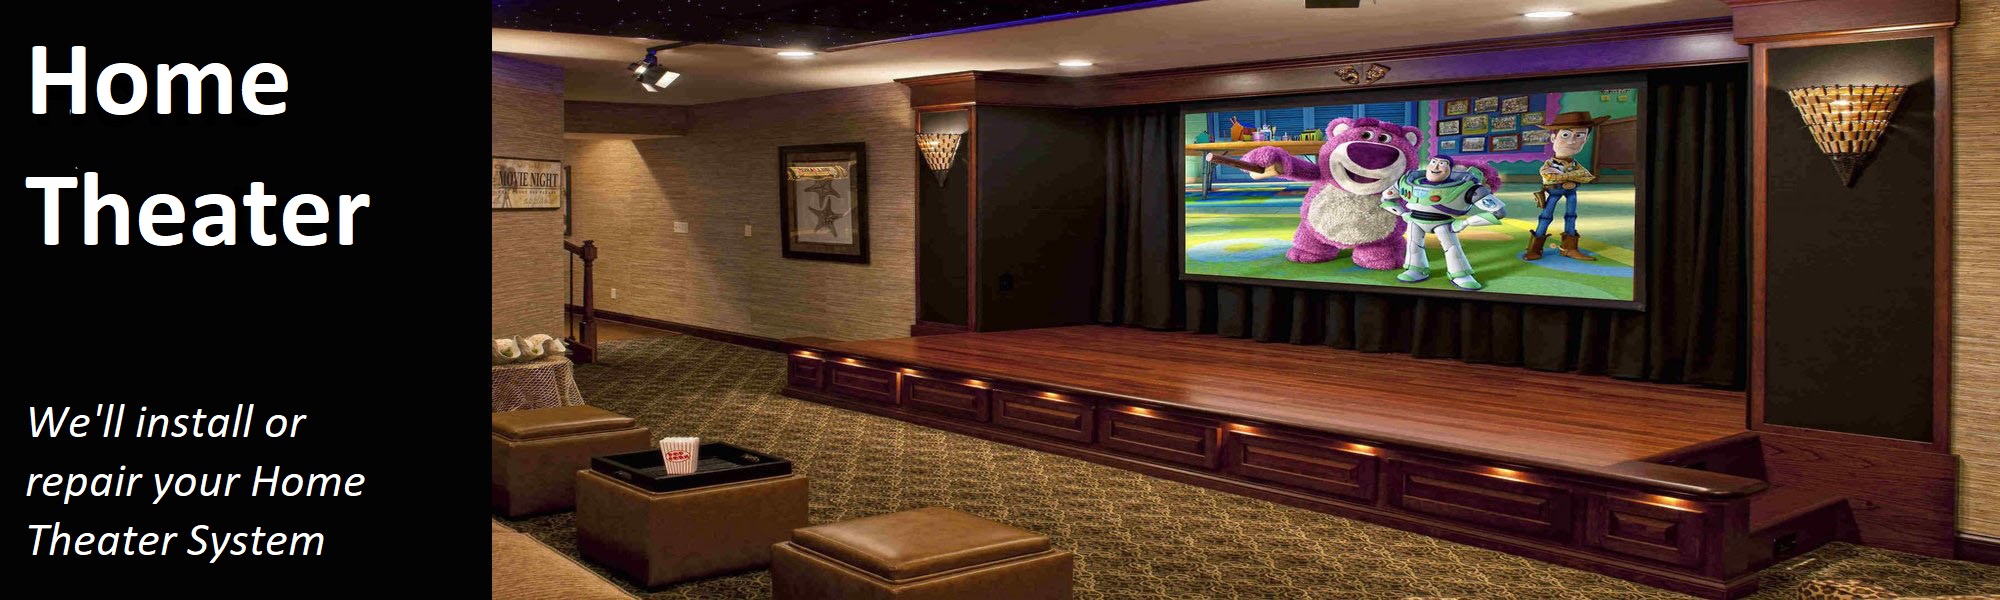 Home Theater installation